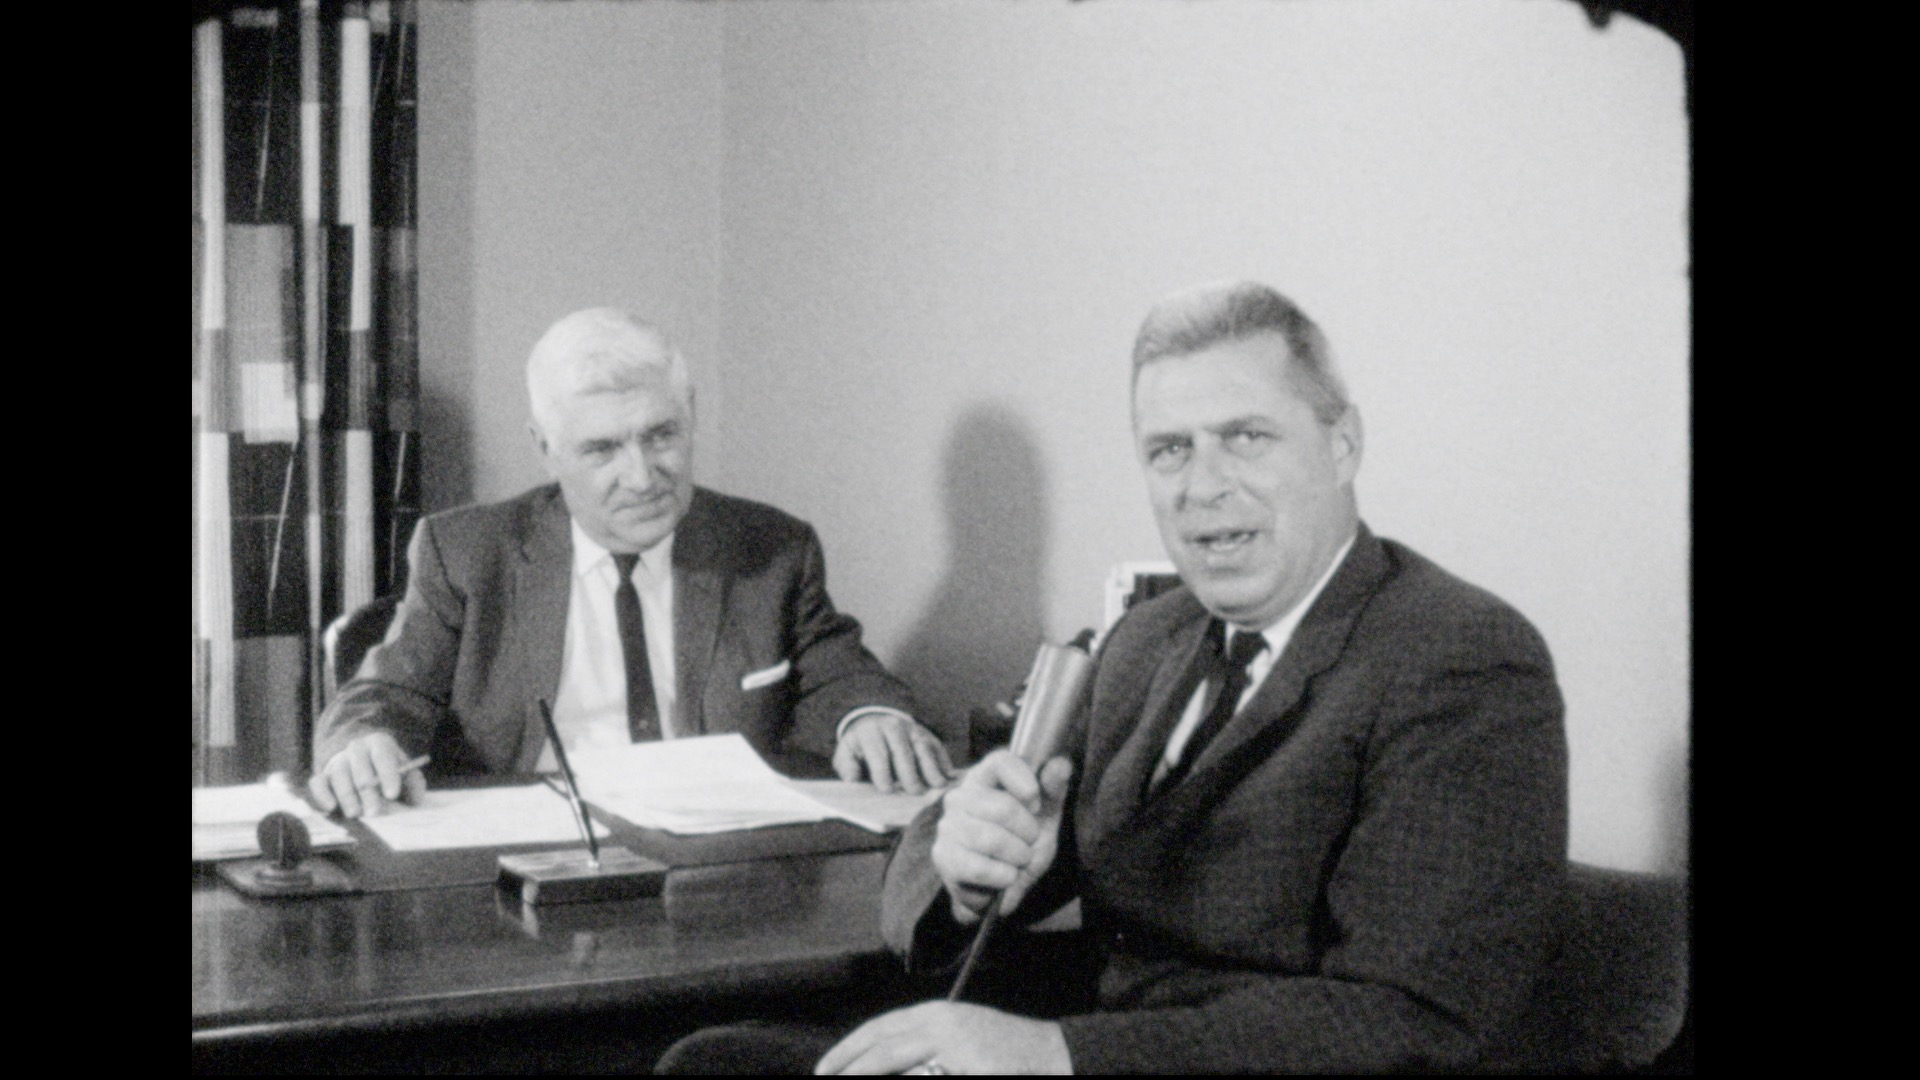 Interview with Charles E. Forsythe (Executive Director, MHSAA), 1963